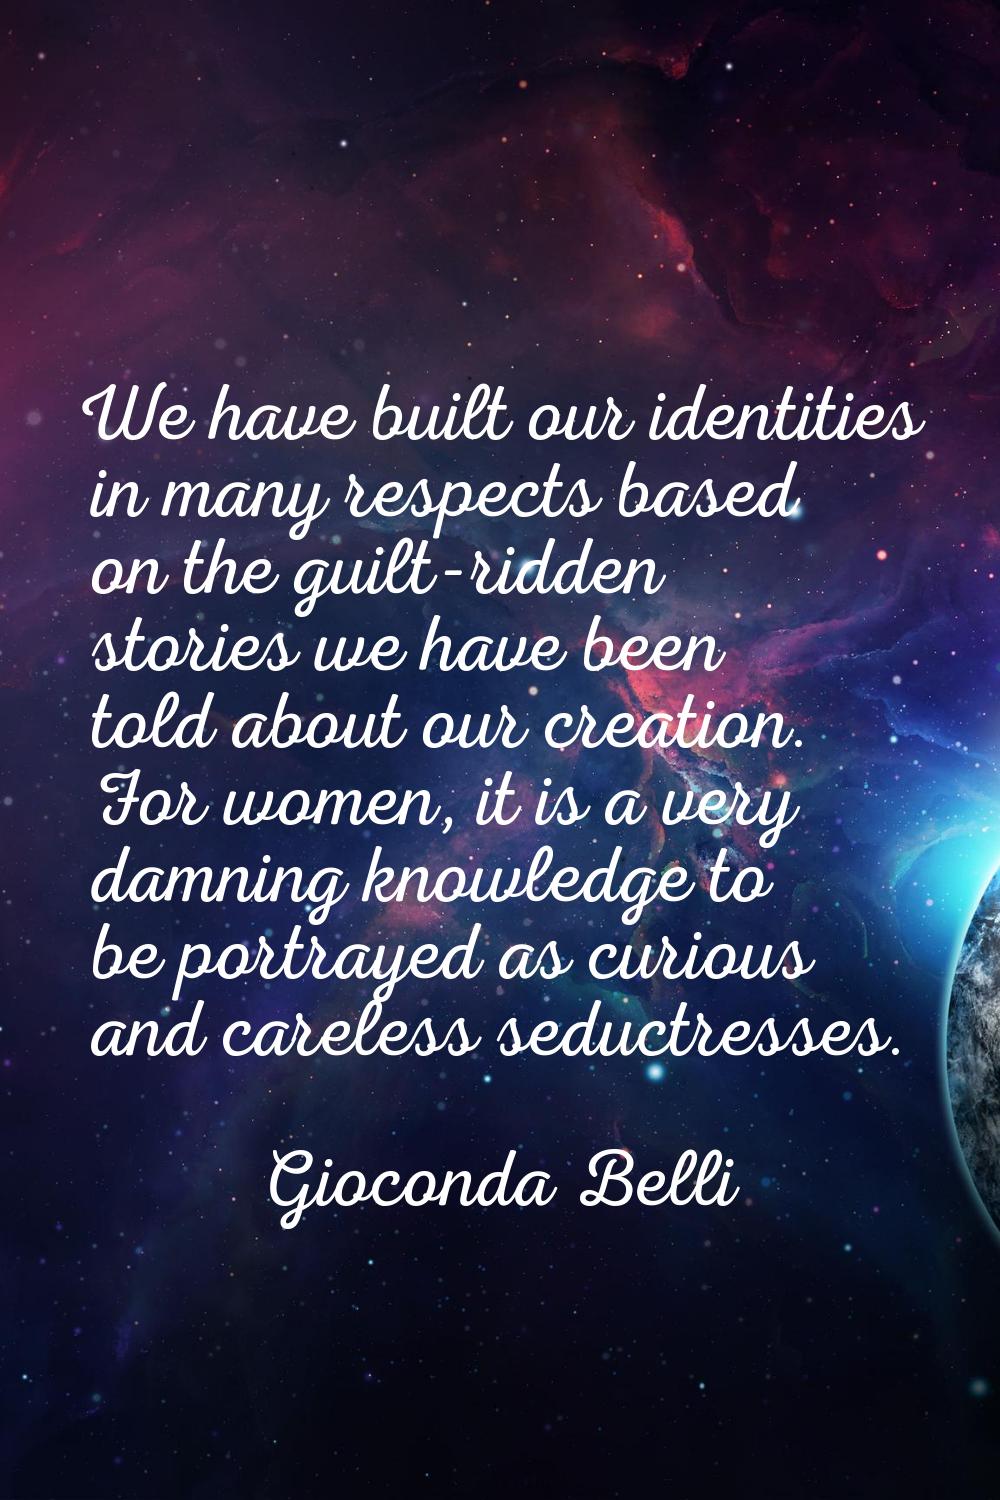 We have built our identities in many respects based on the guilt-ridden stories we have been told a